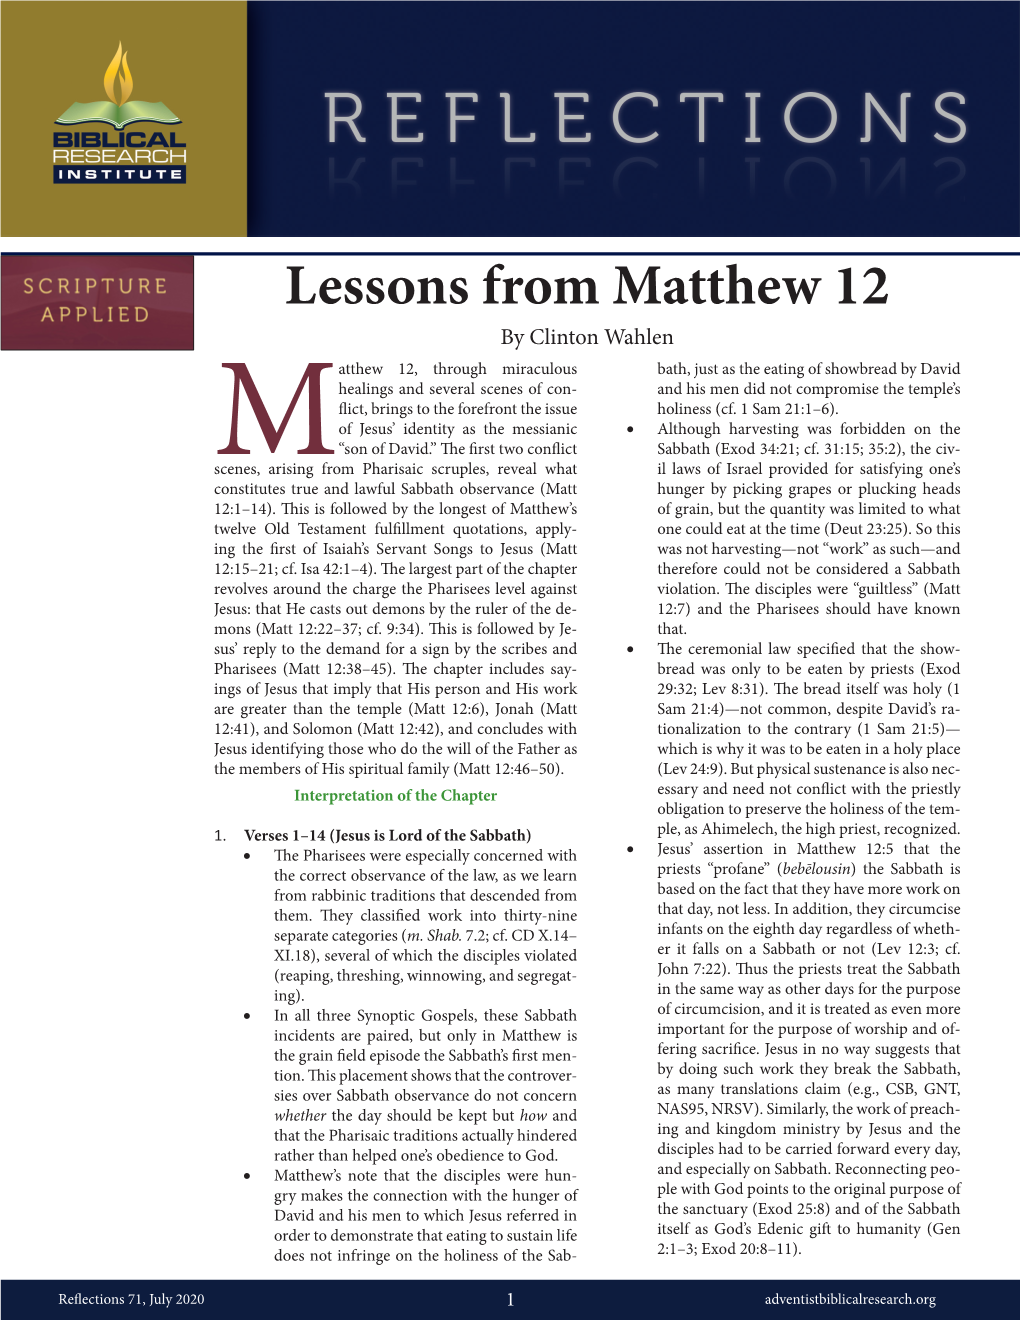 Lessons from Matthew 12